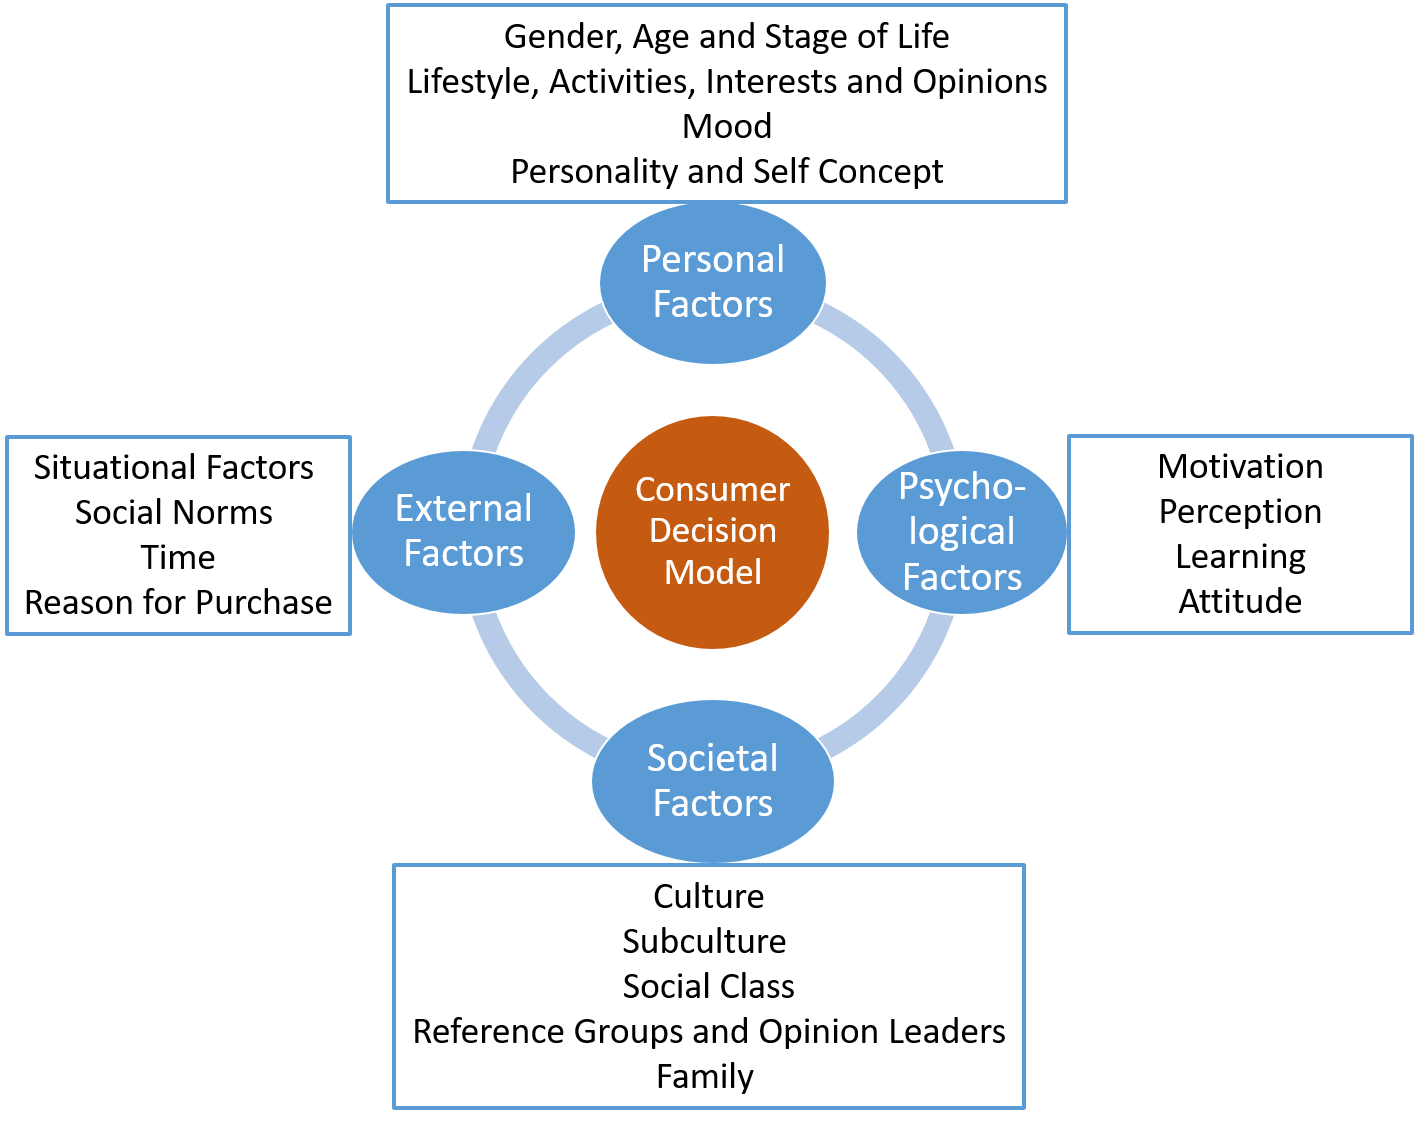 Personal, psychological, societal and external factors are all part of the consumer decision model